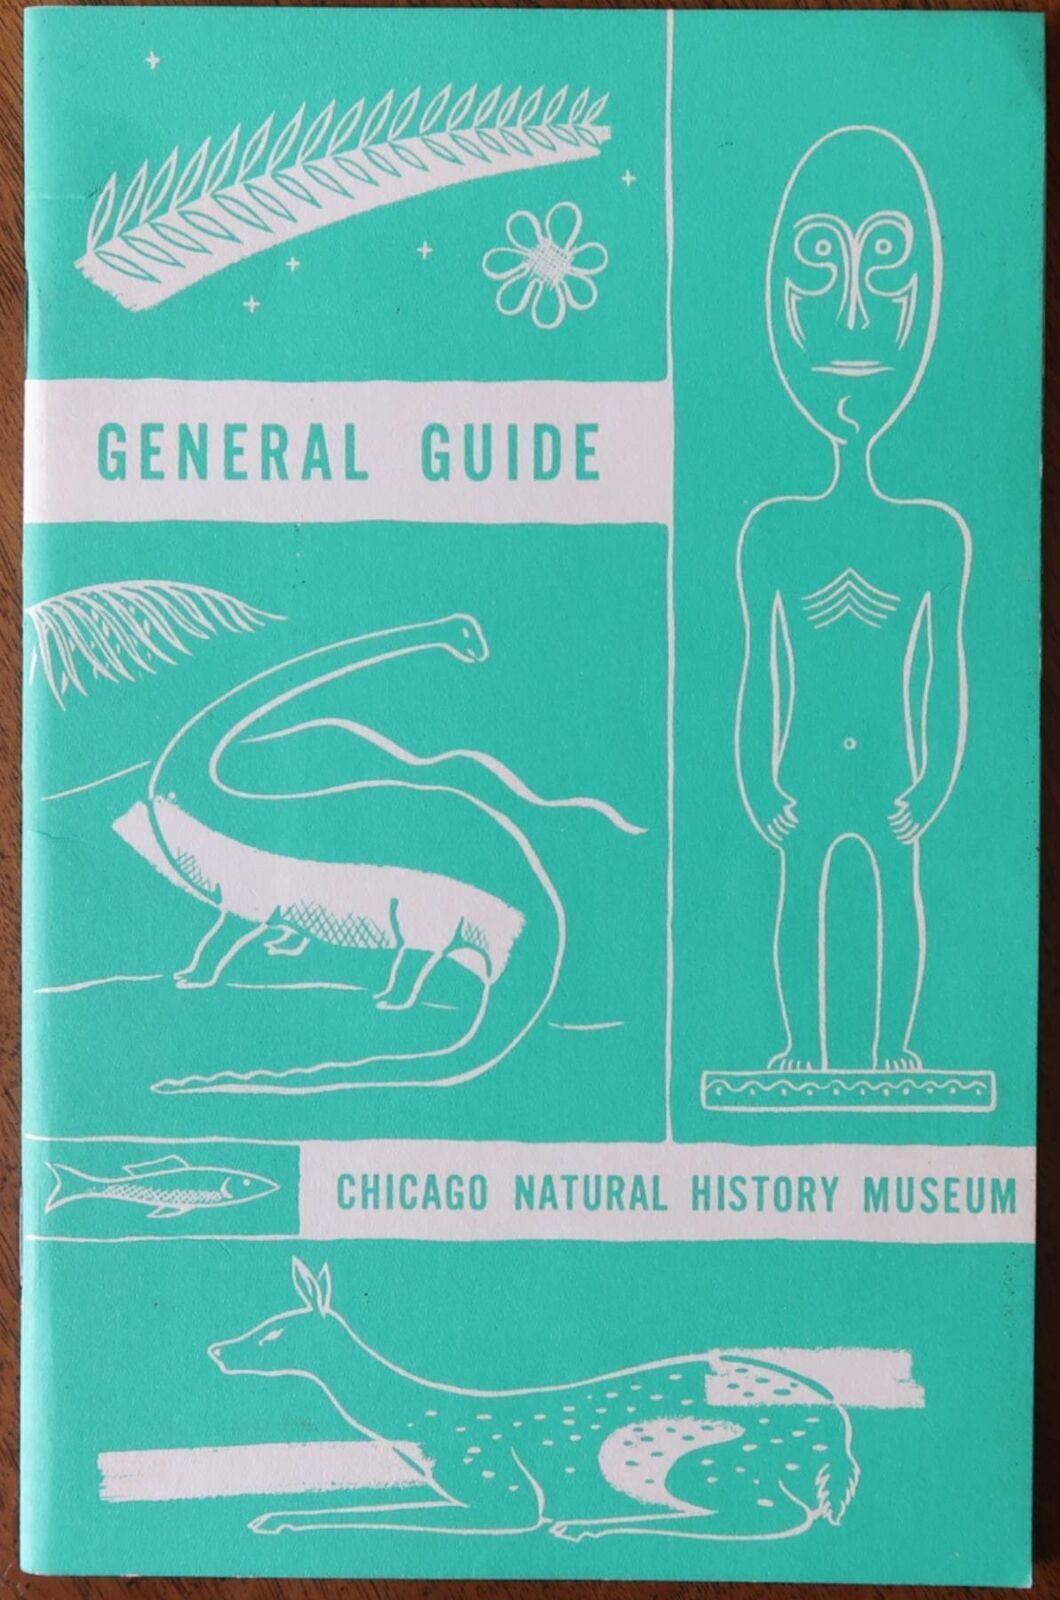 1965 CHICAGO NATURAL HISTORY MUSEUM GENERAL GUIDE 48 PAGES M1-102